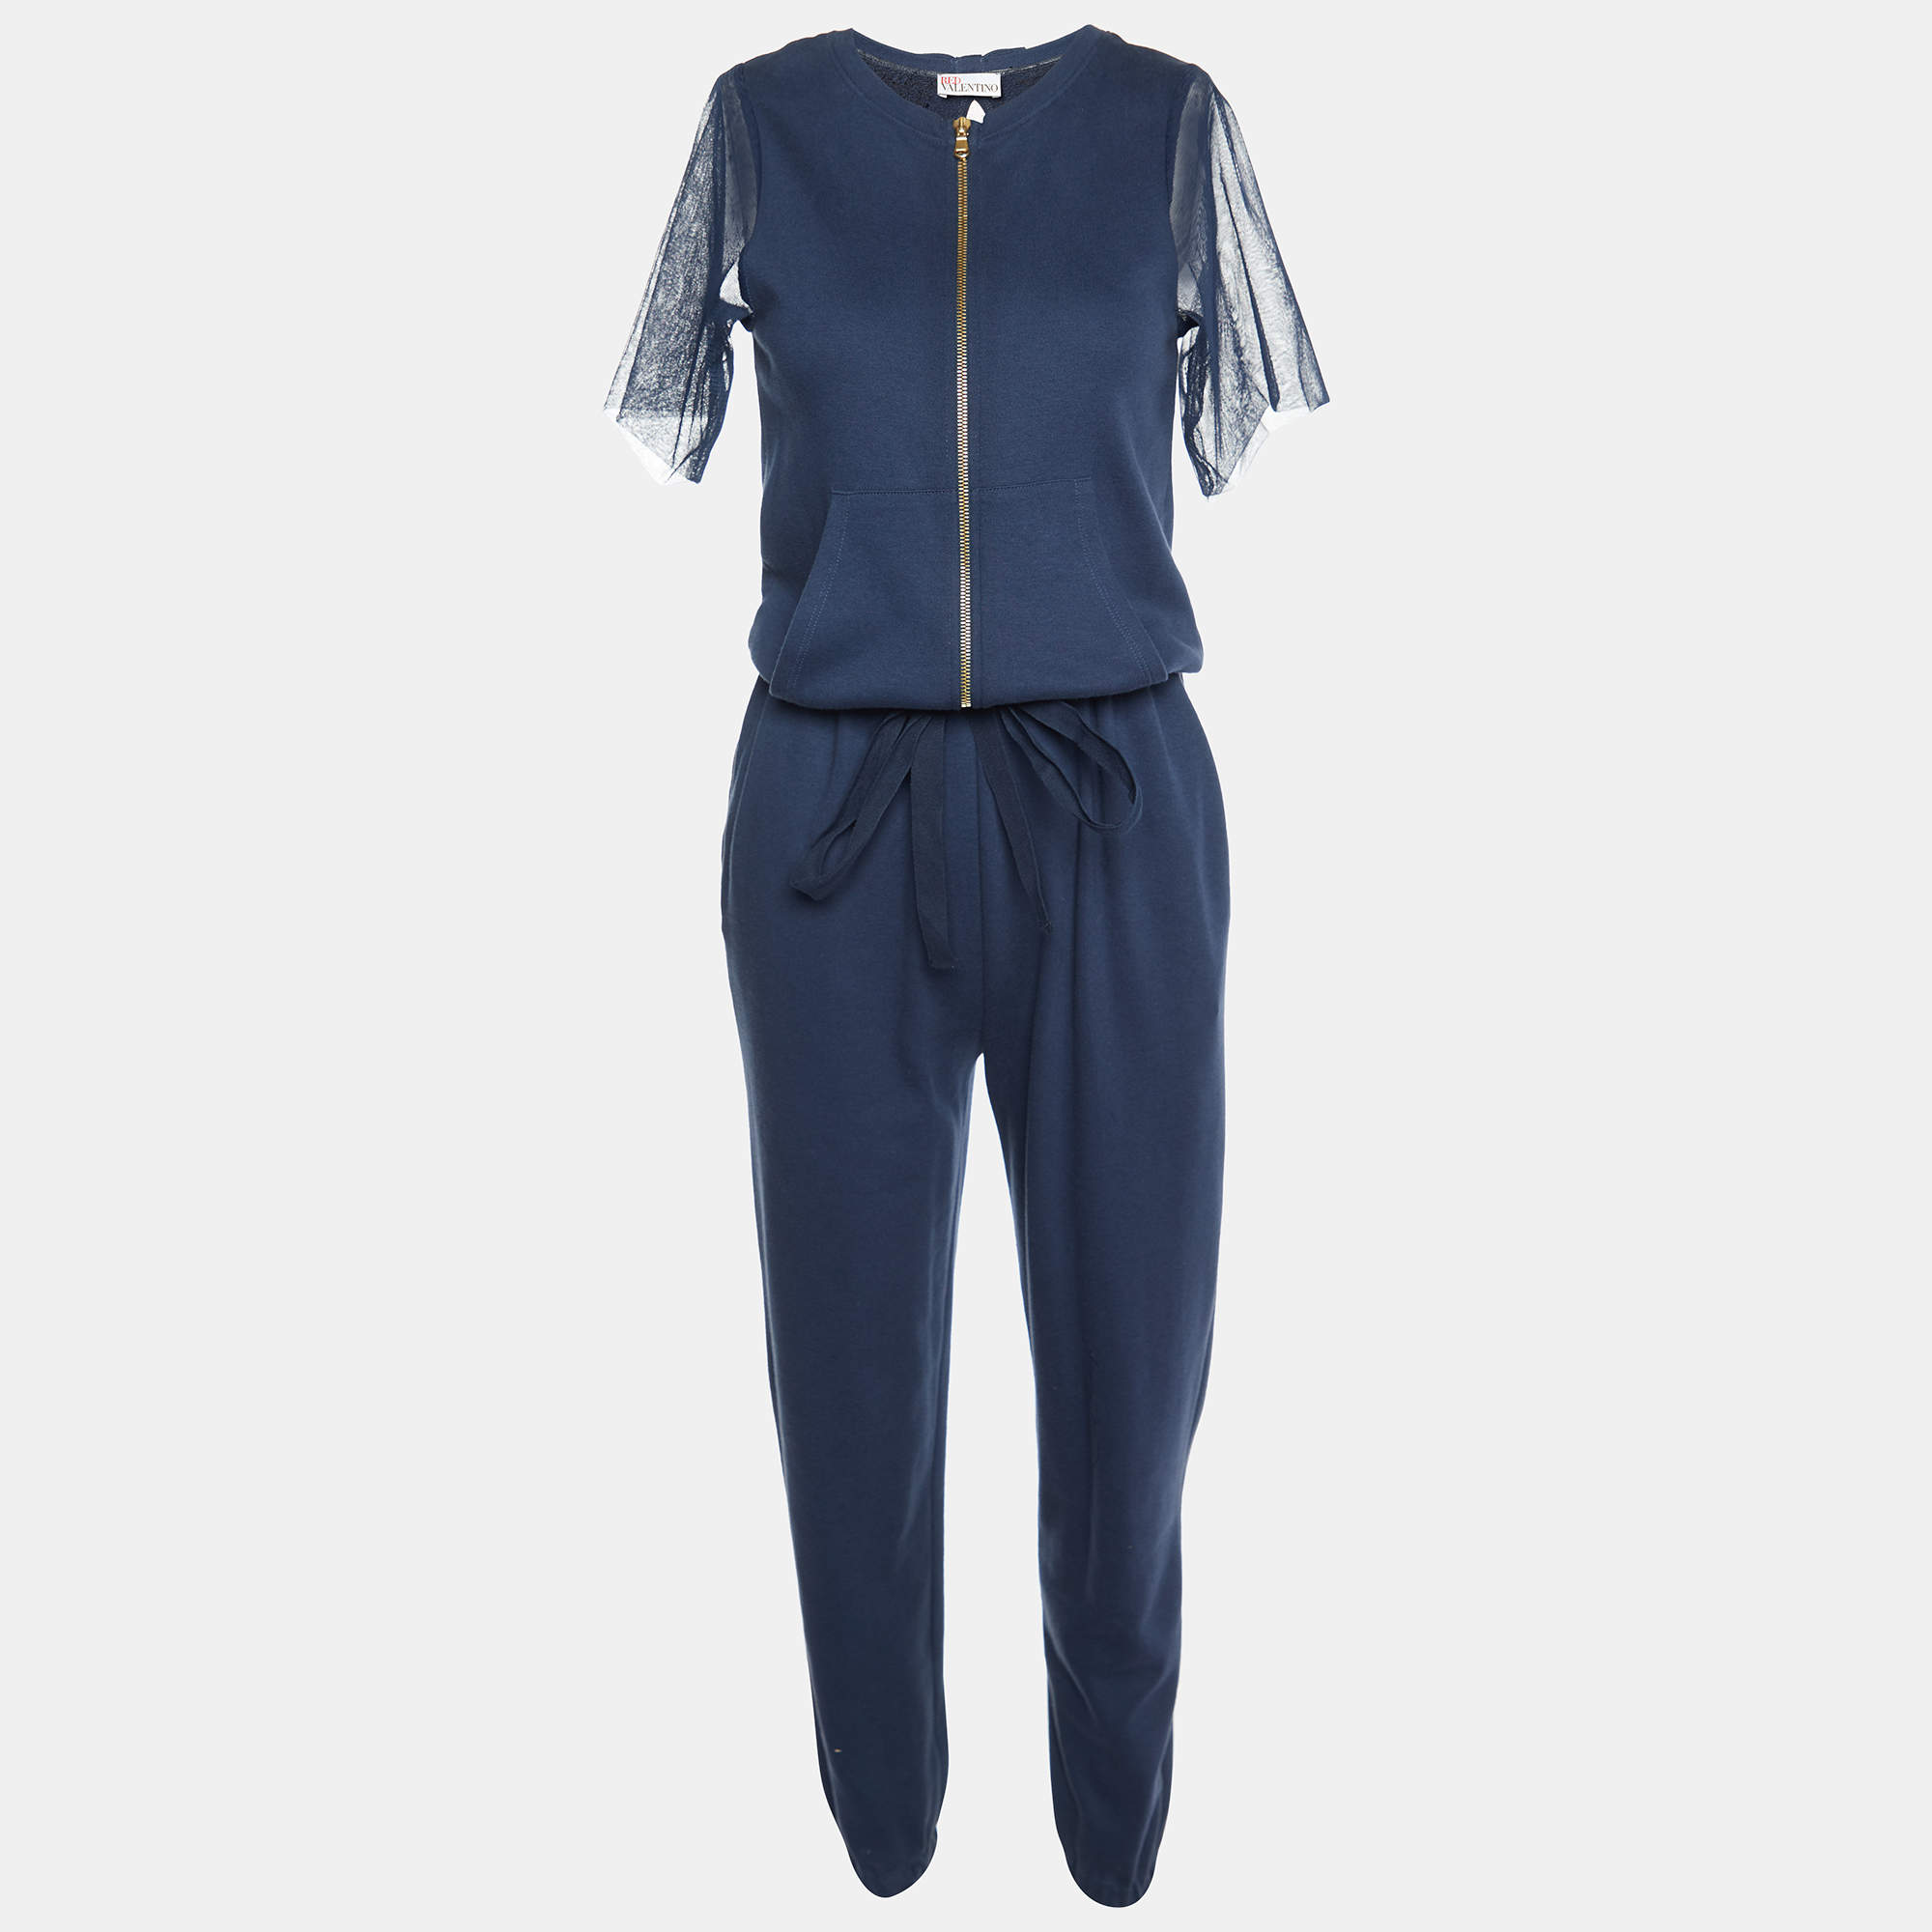 RED Valentino Navy Blue Cotton Knit & Lace Jumpsuit S